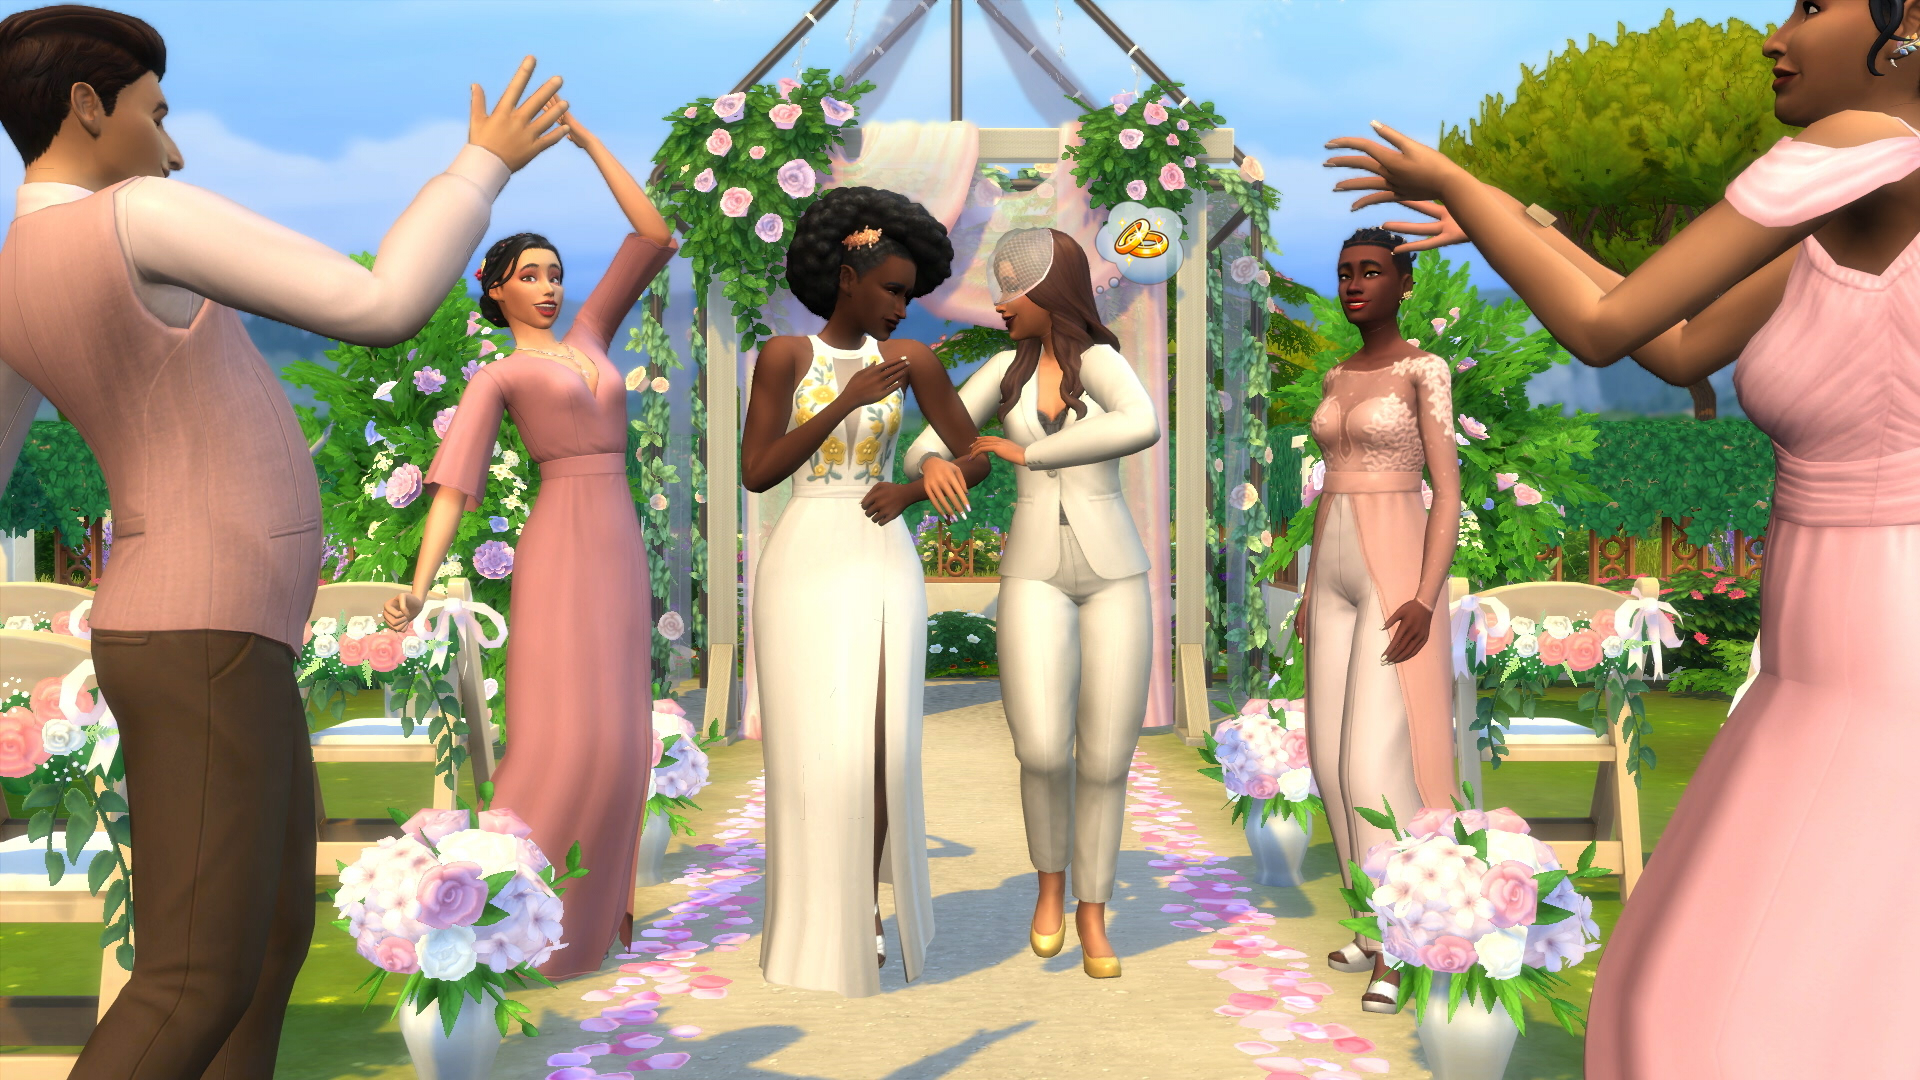 The Sims 4 My Wedding Stories Overview: I Don't